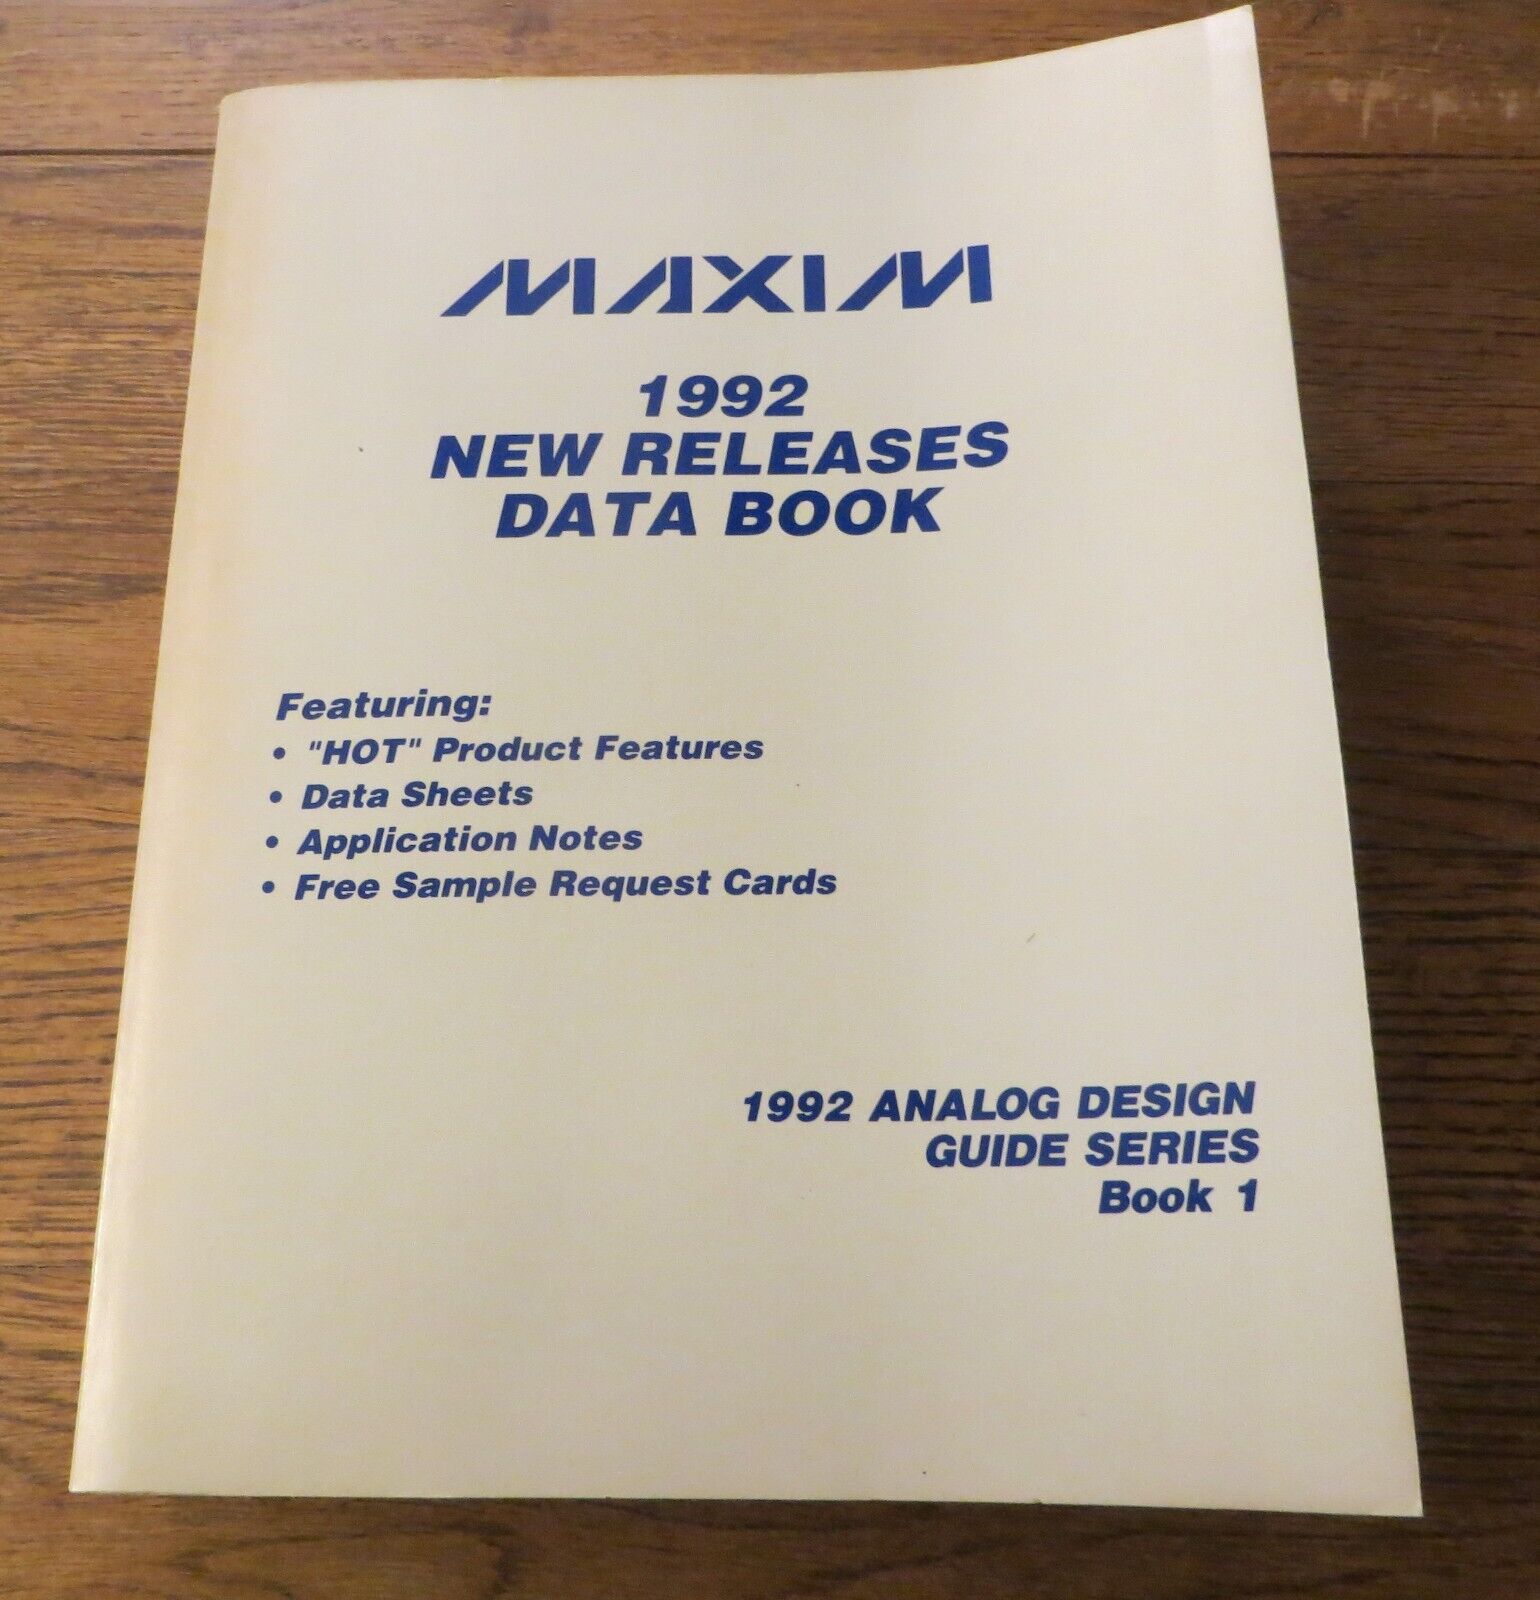 1992 New Releases Data Book: 1992 Analog Design Guide Series Book 1